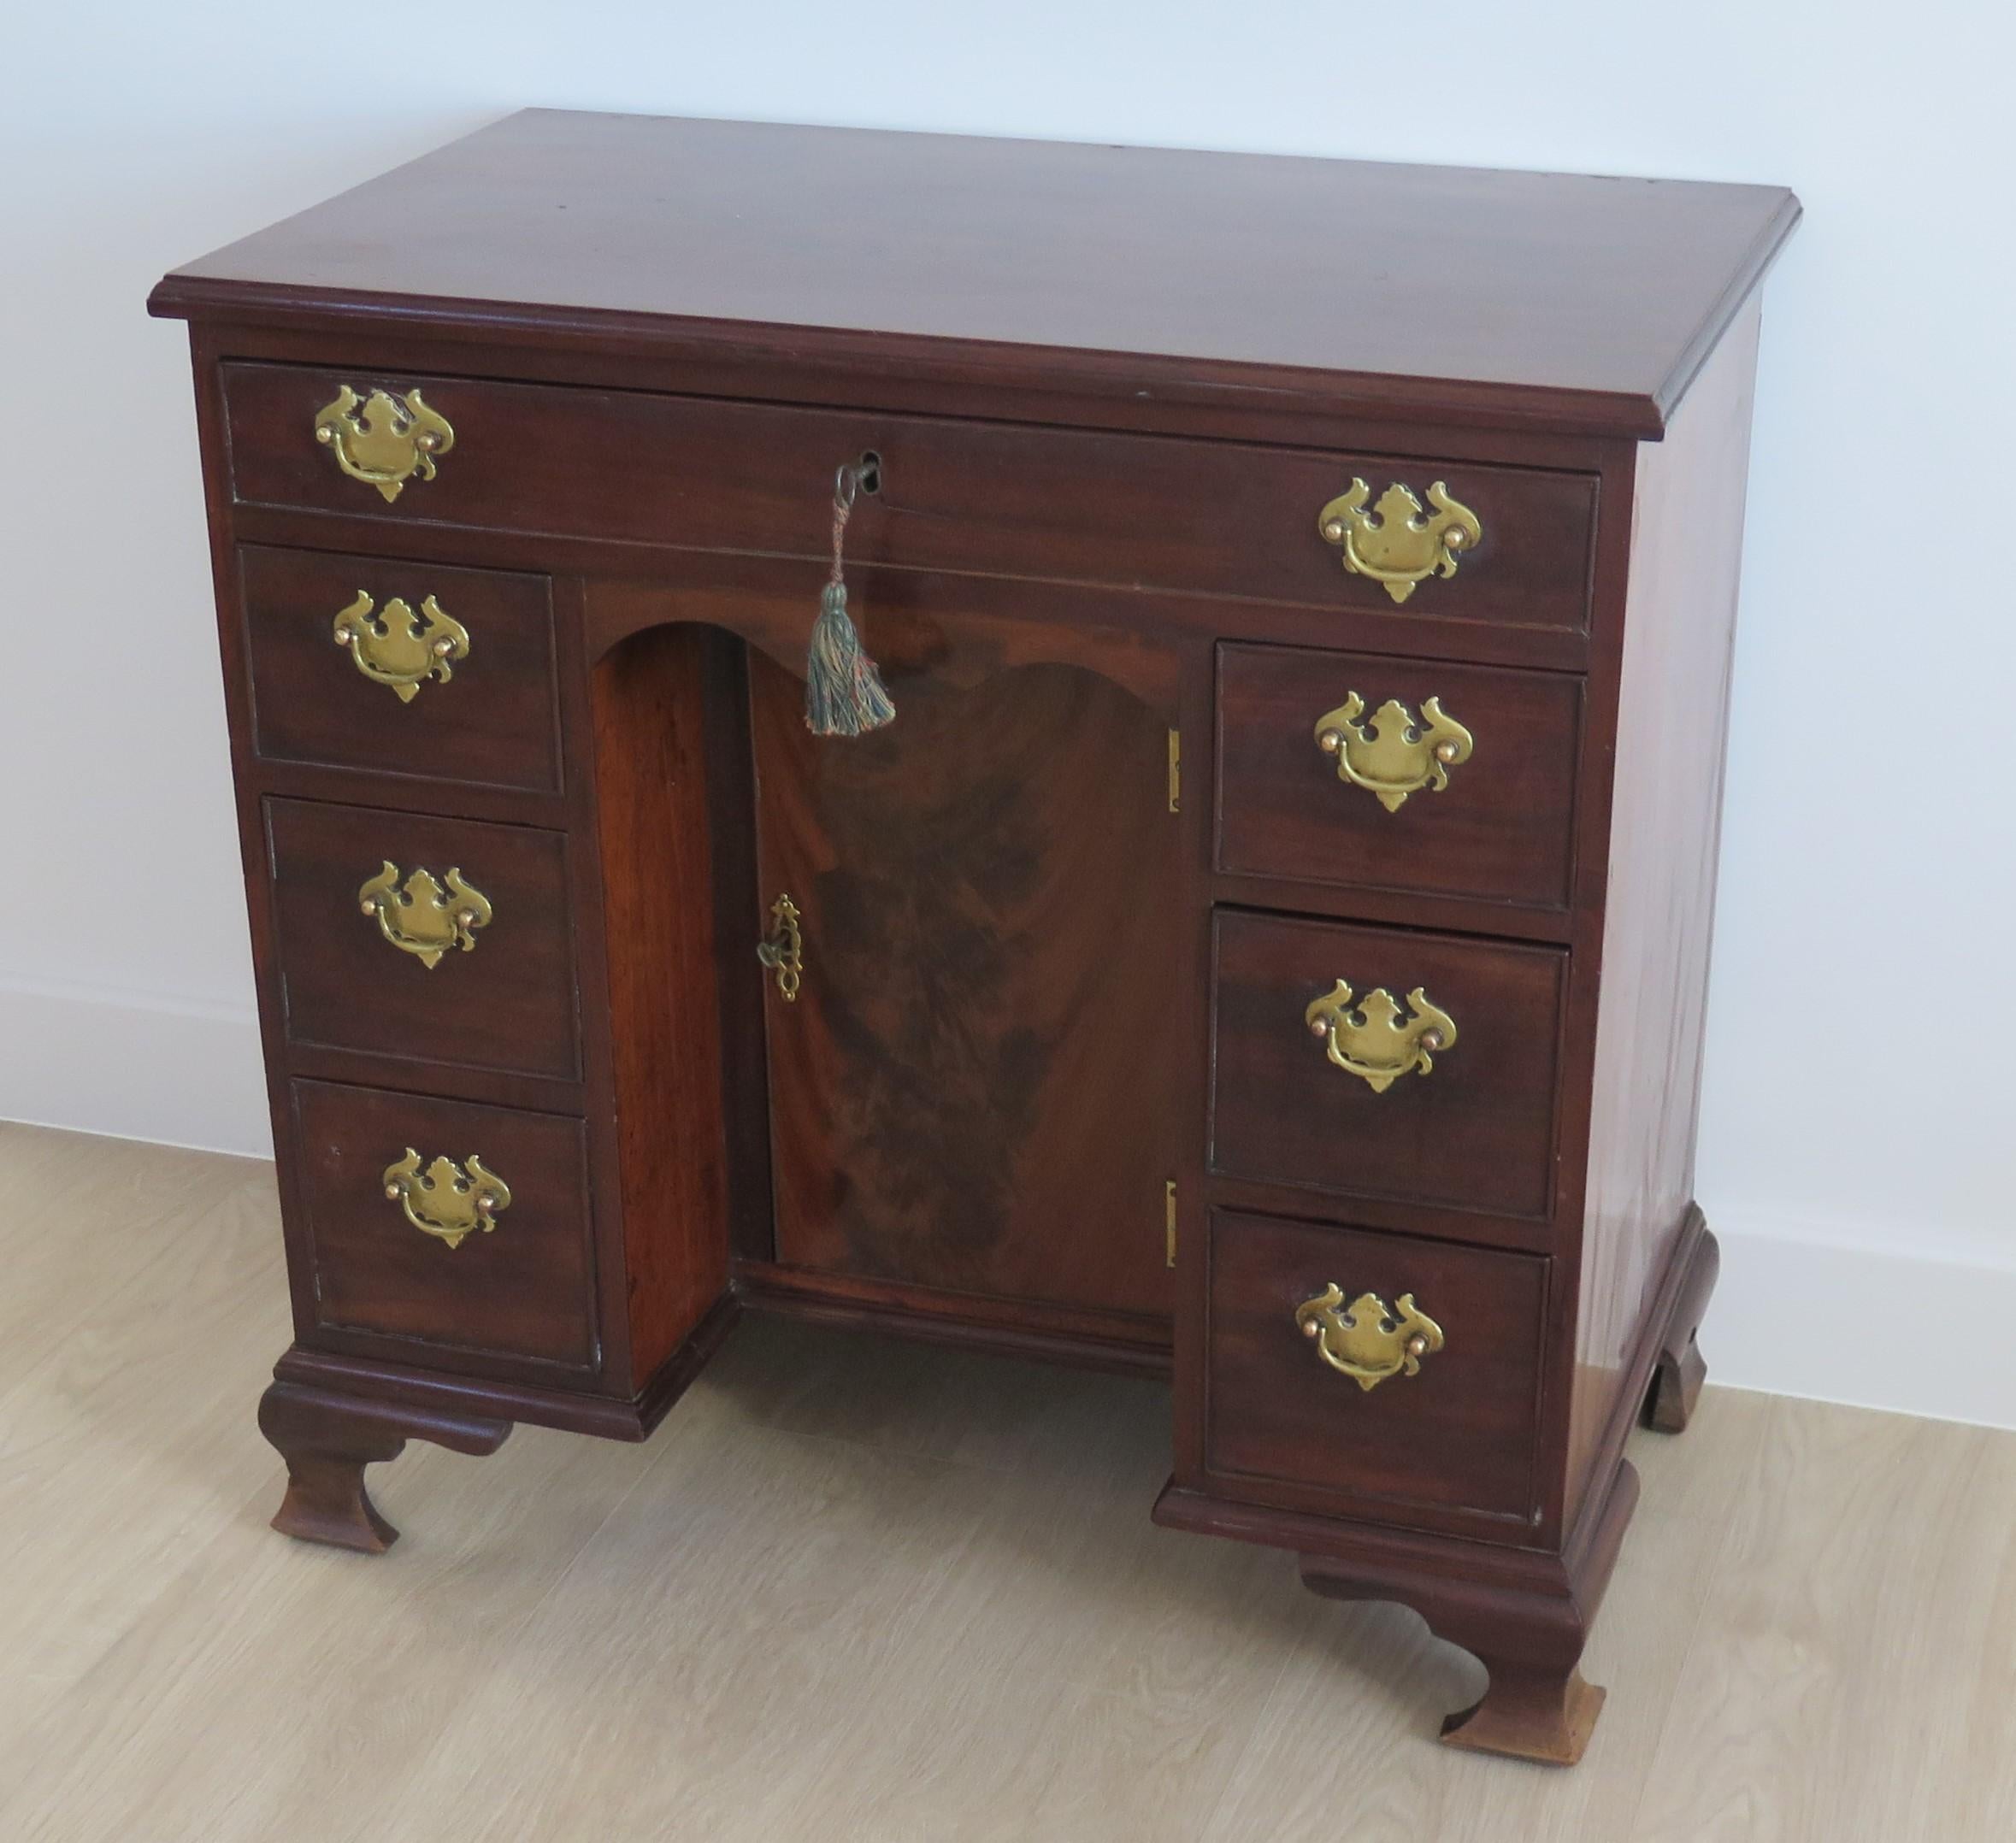 George 11nd small Kneehole Desk in Mahogany, English Circa 1745 For Sale 1